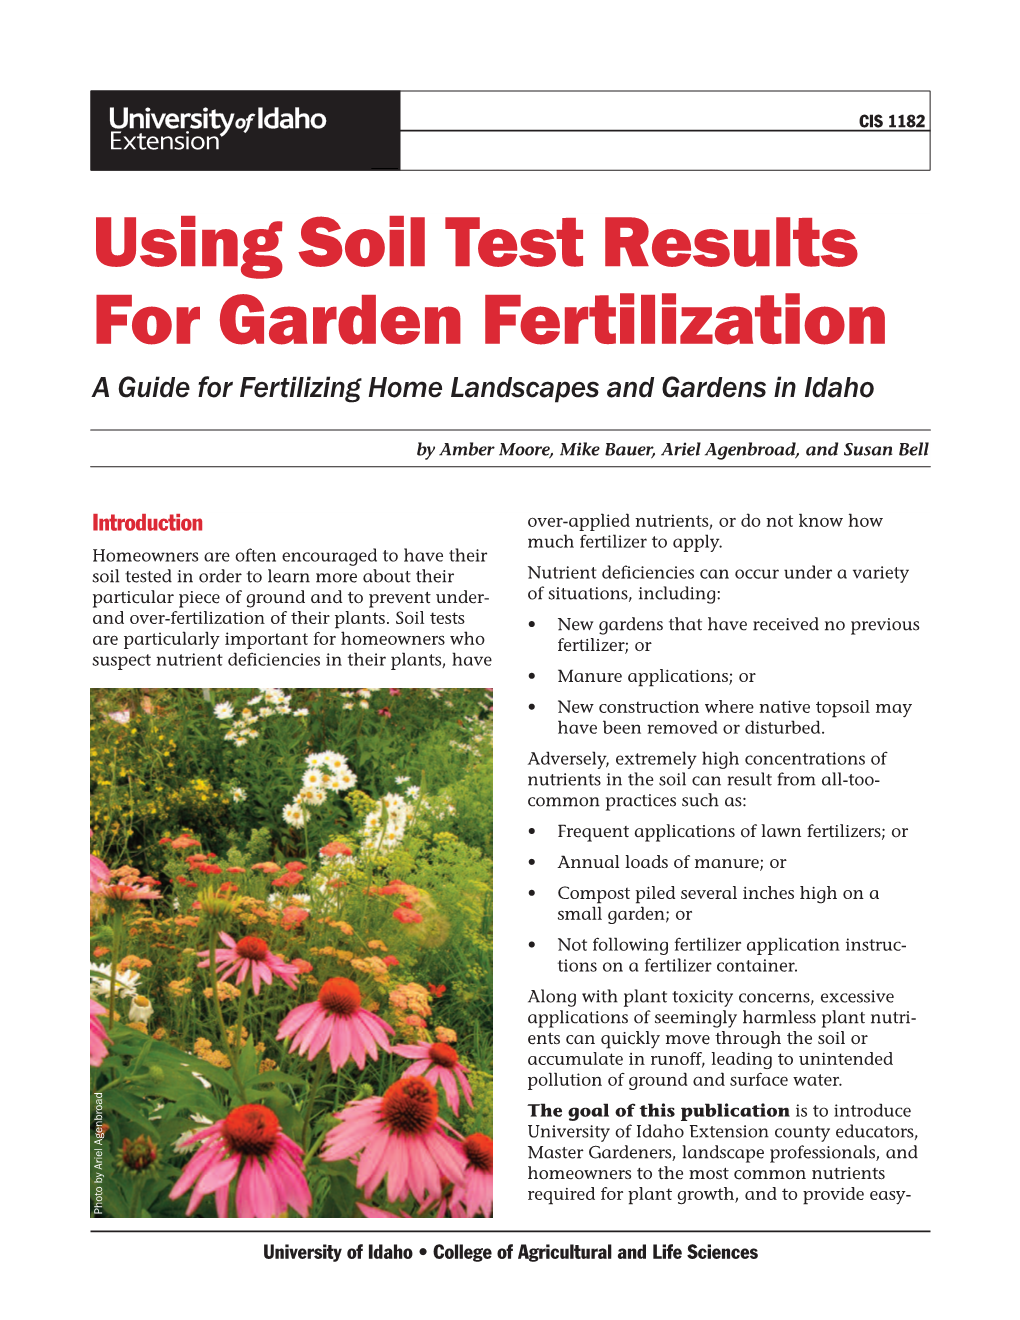 Using Soil Test Results for Garden Fertilization a Guide for Fertilizing Home Landscapes and Gardens in Idaho